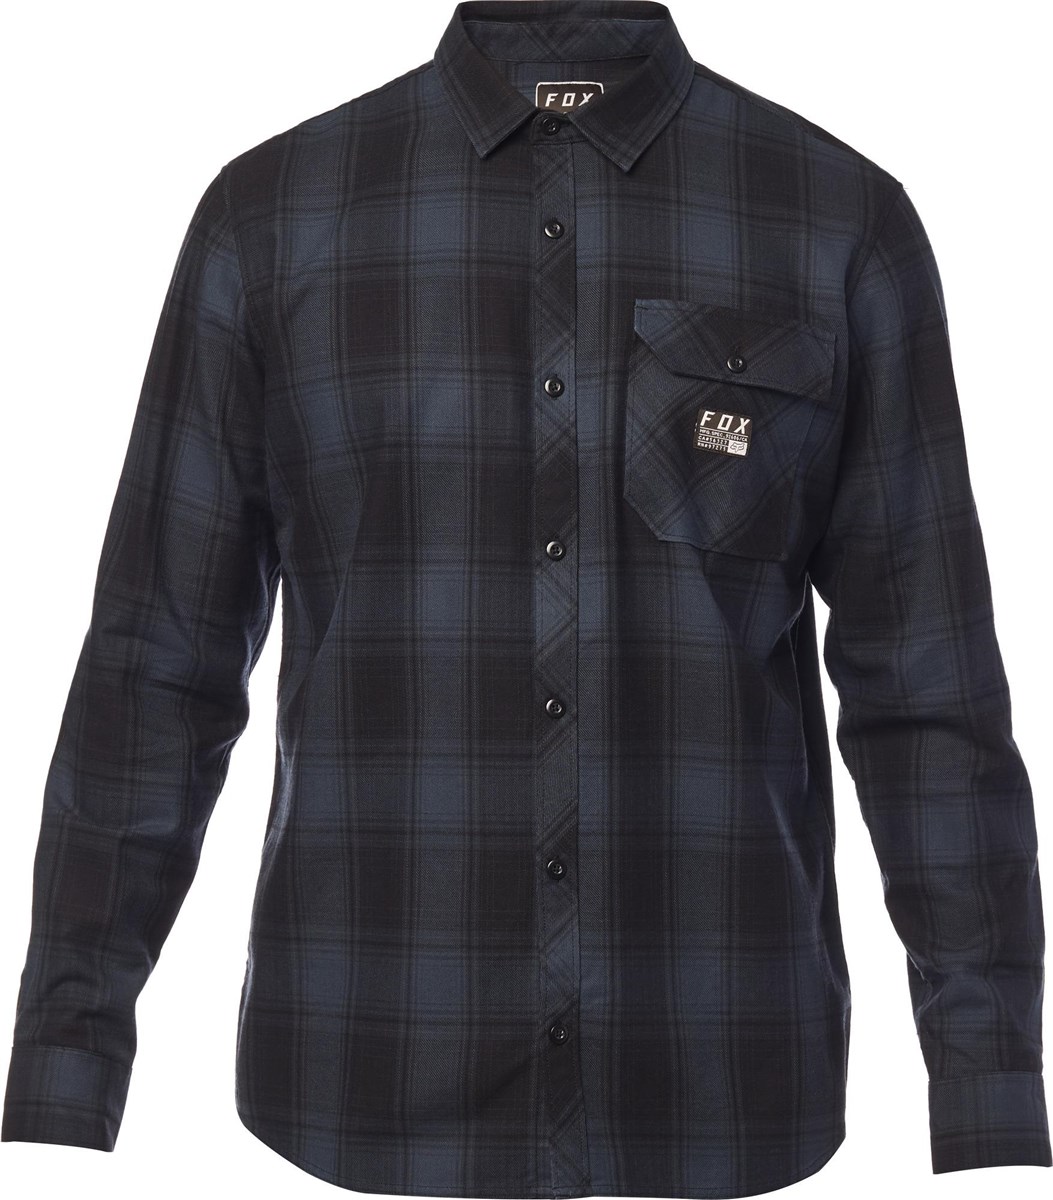 Fox Clothing Voyd Flannel Shirt product image